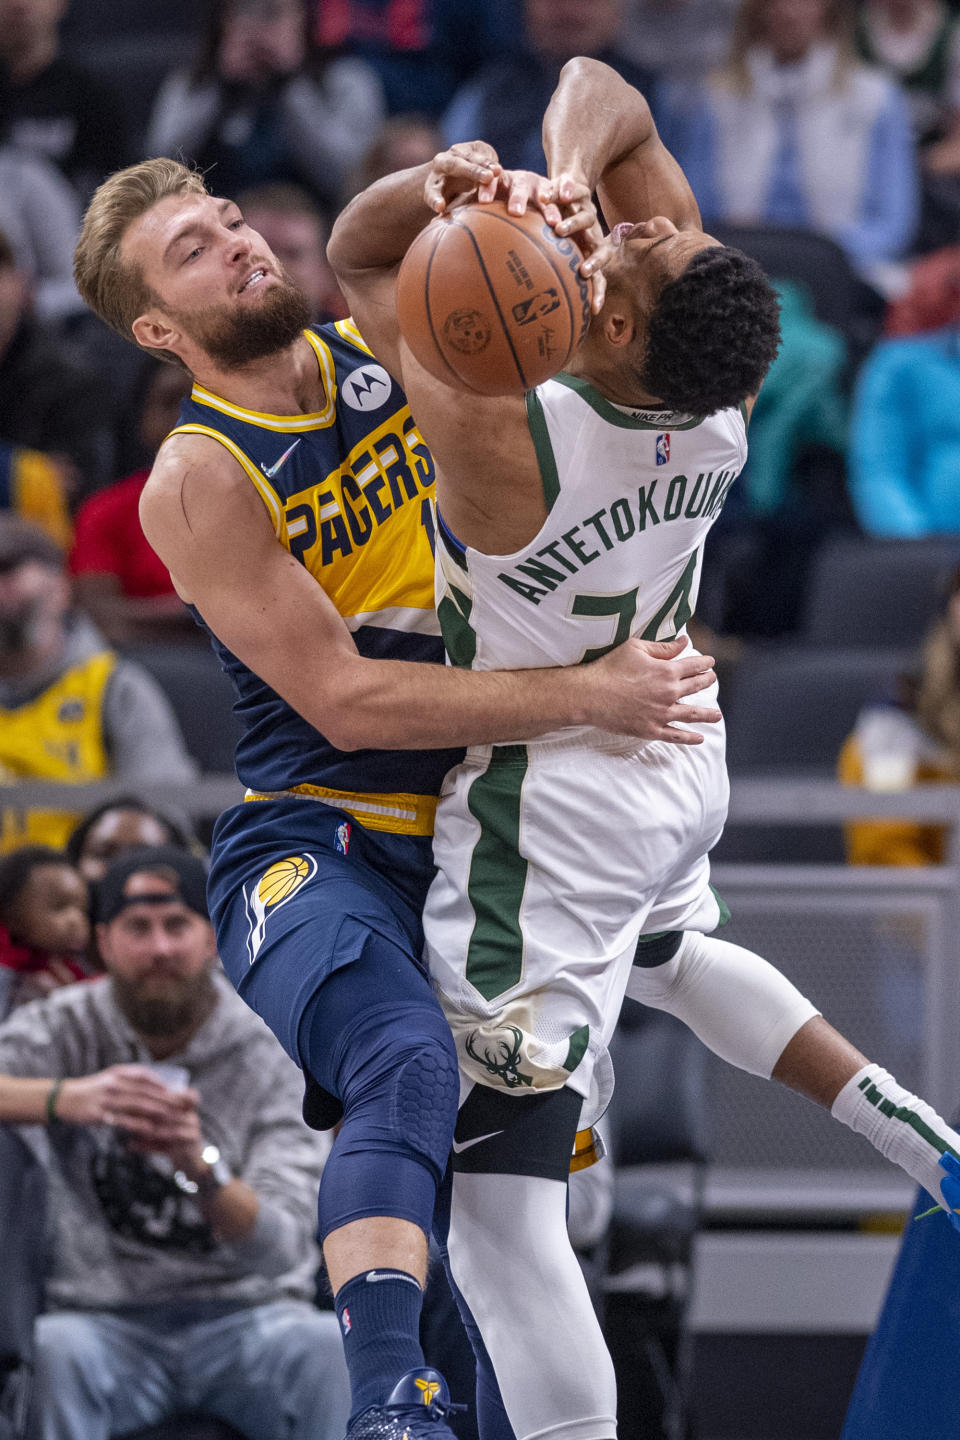 Indiana Pacers forward Domantas Sabonis, left, and Milwaukee Bucks forward Giannis Antetokounmpo (34) battle for the ball during the first half of an NBA basketball game in Indianapolis, Sunday, Nov. 28, 2021. (AP Photo/Doug McSchooler)